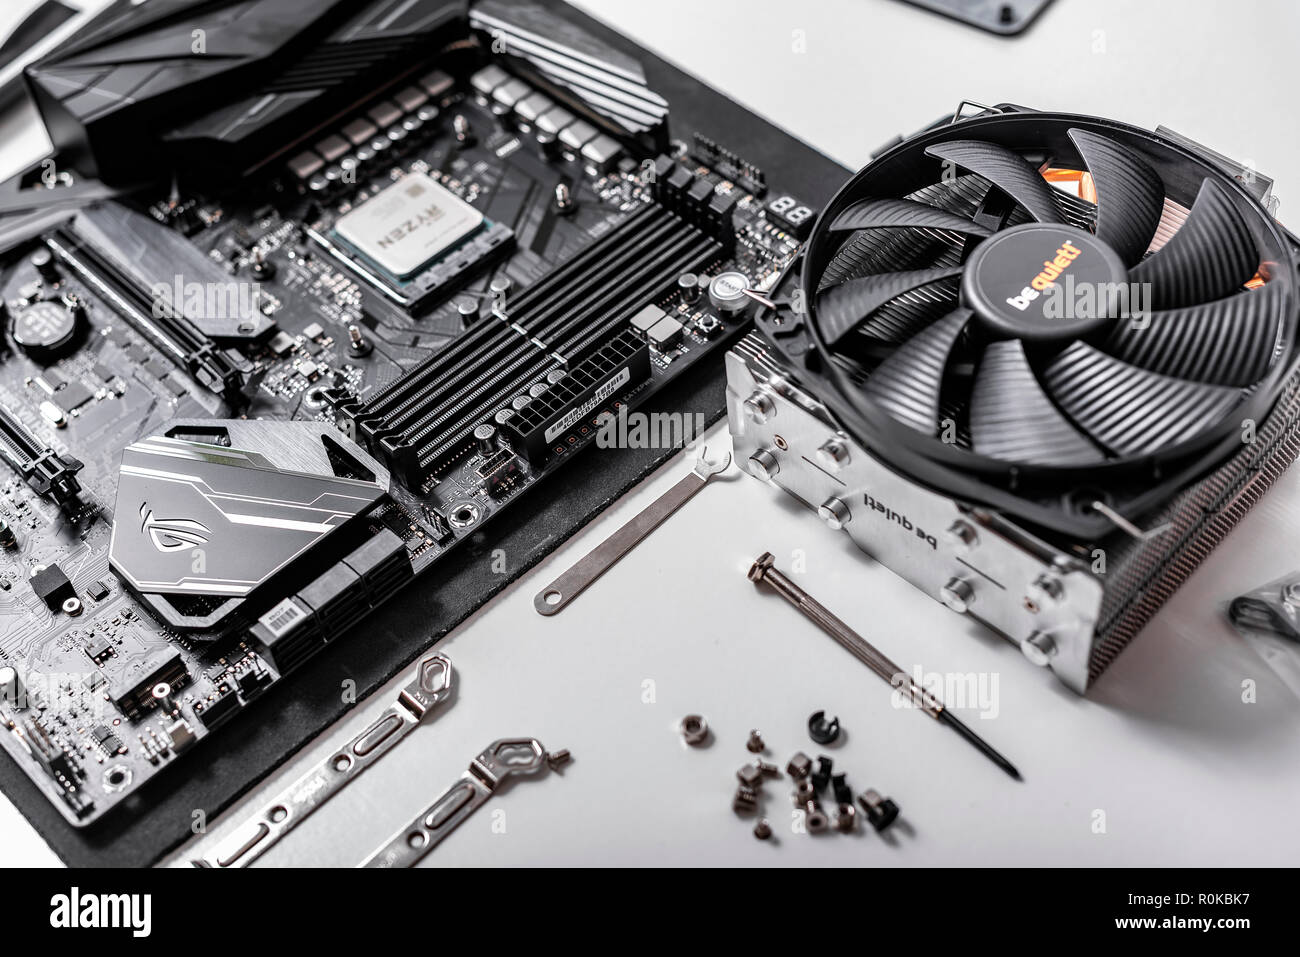 Processor Ryzen 7 2700X against the background of a computer motherboard  Asus rog crosshair vii hero, and cooler be quiet Stock Photo - Alamy